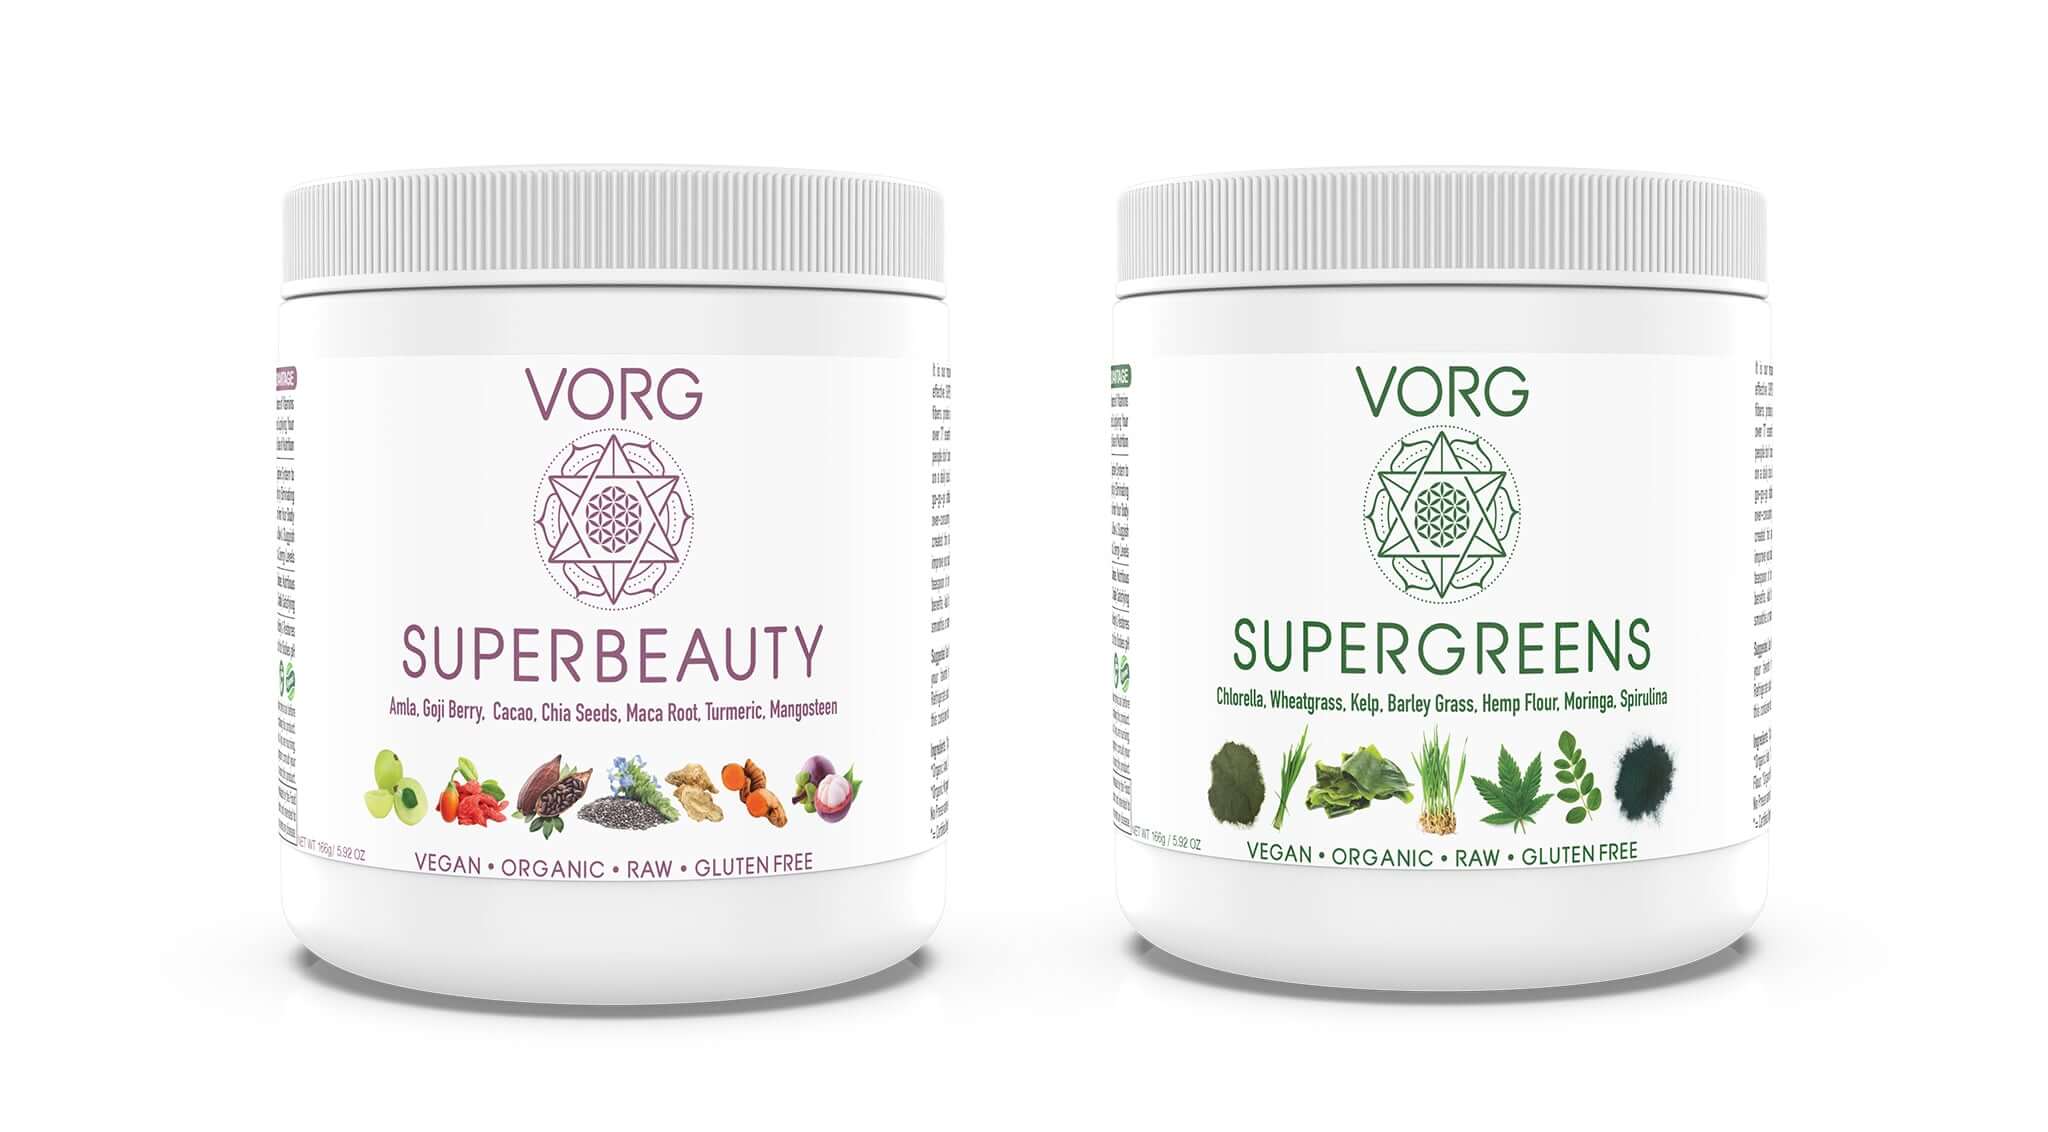 Daily Detox SUPERGREENS for Cleansing, Radiance-Boosting SUPERBEAUTY for Glowing Skin